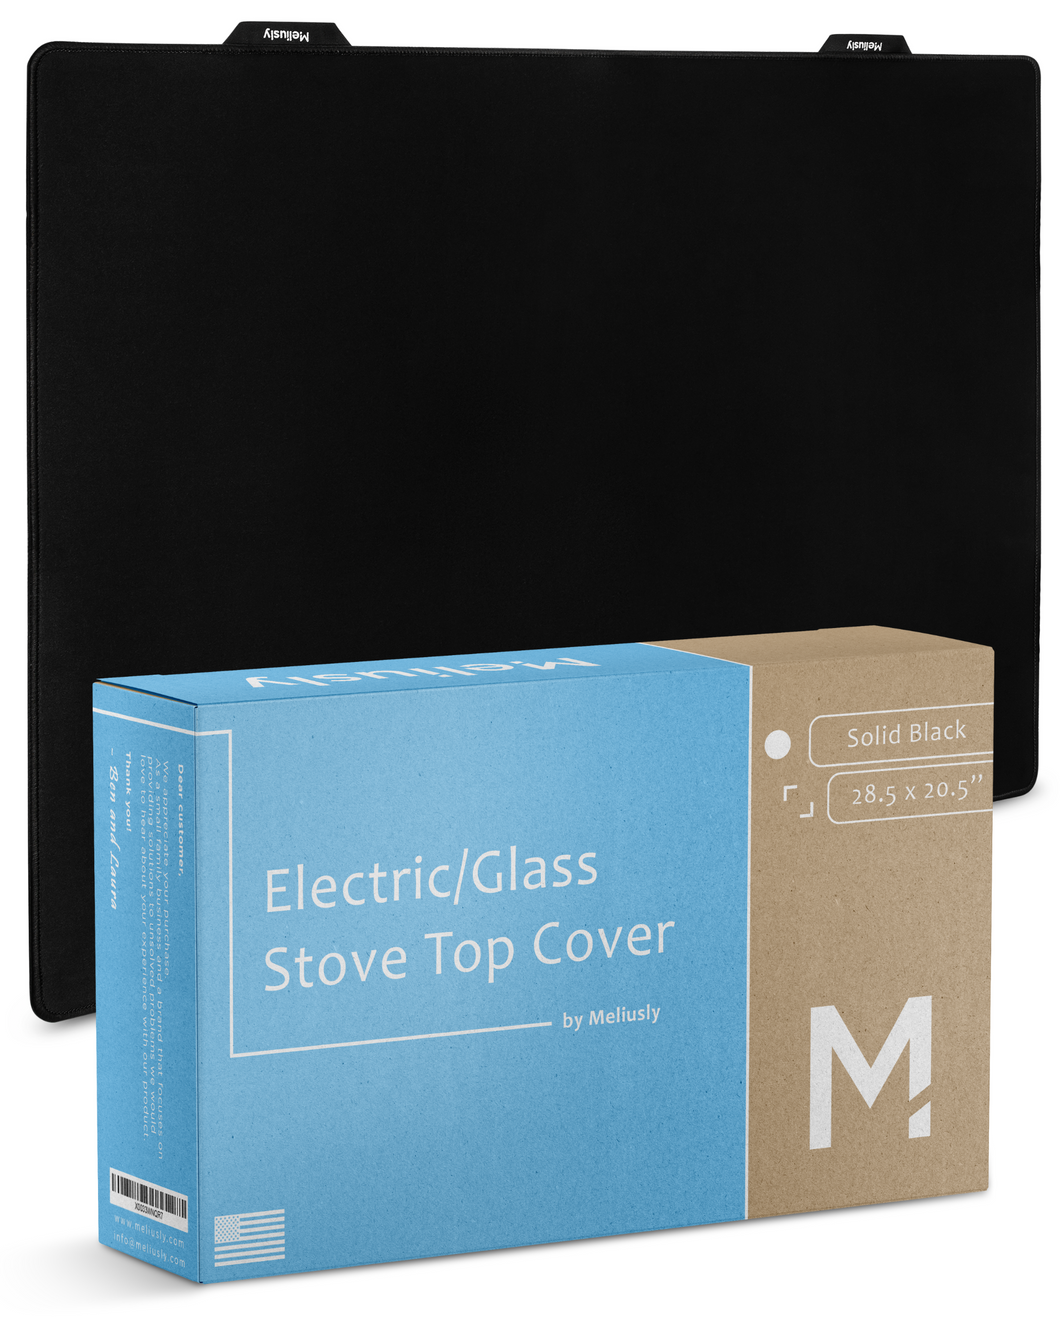 Stove Top Covers for Electric Stove - Electric Glass Top Stove Cover